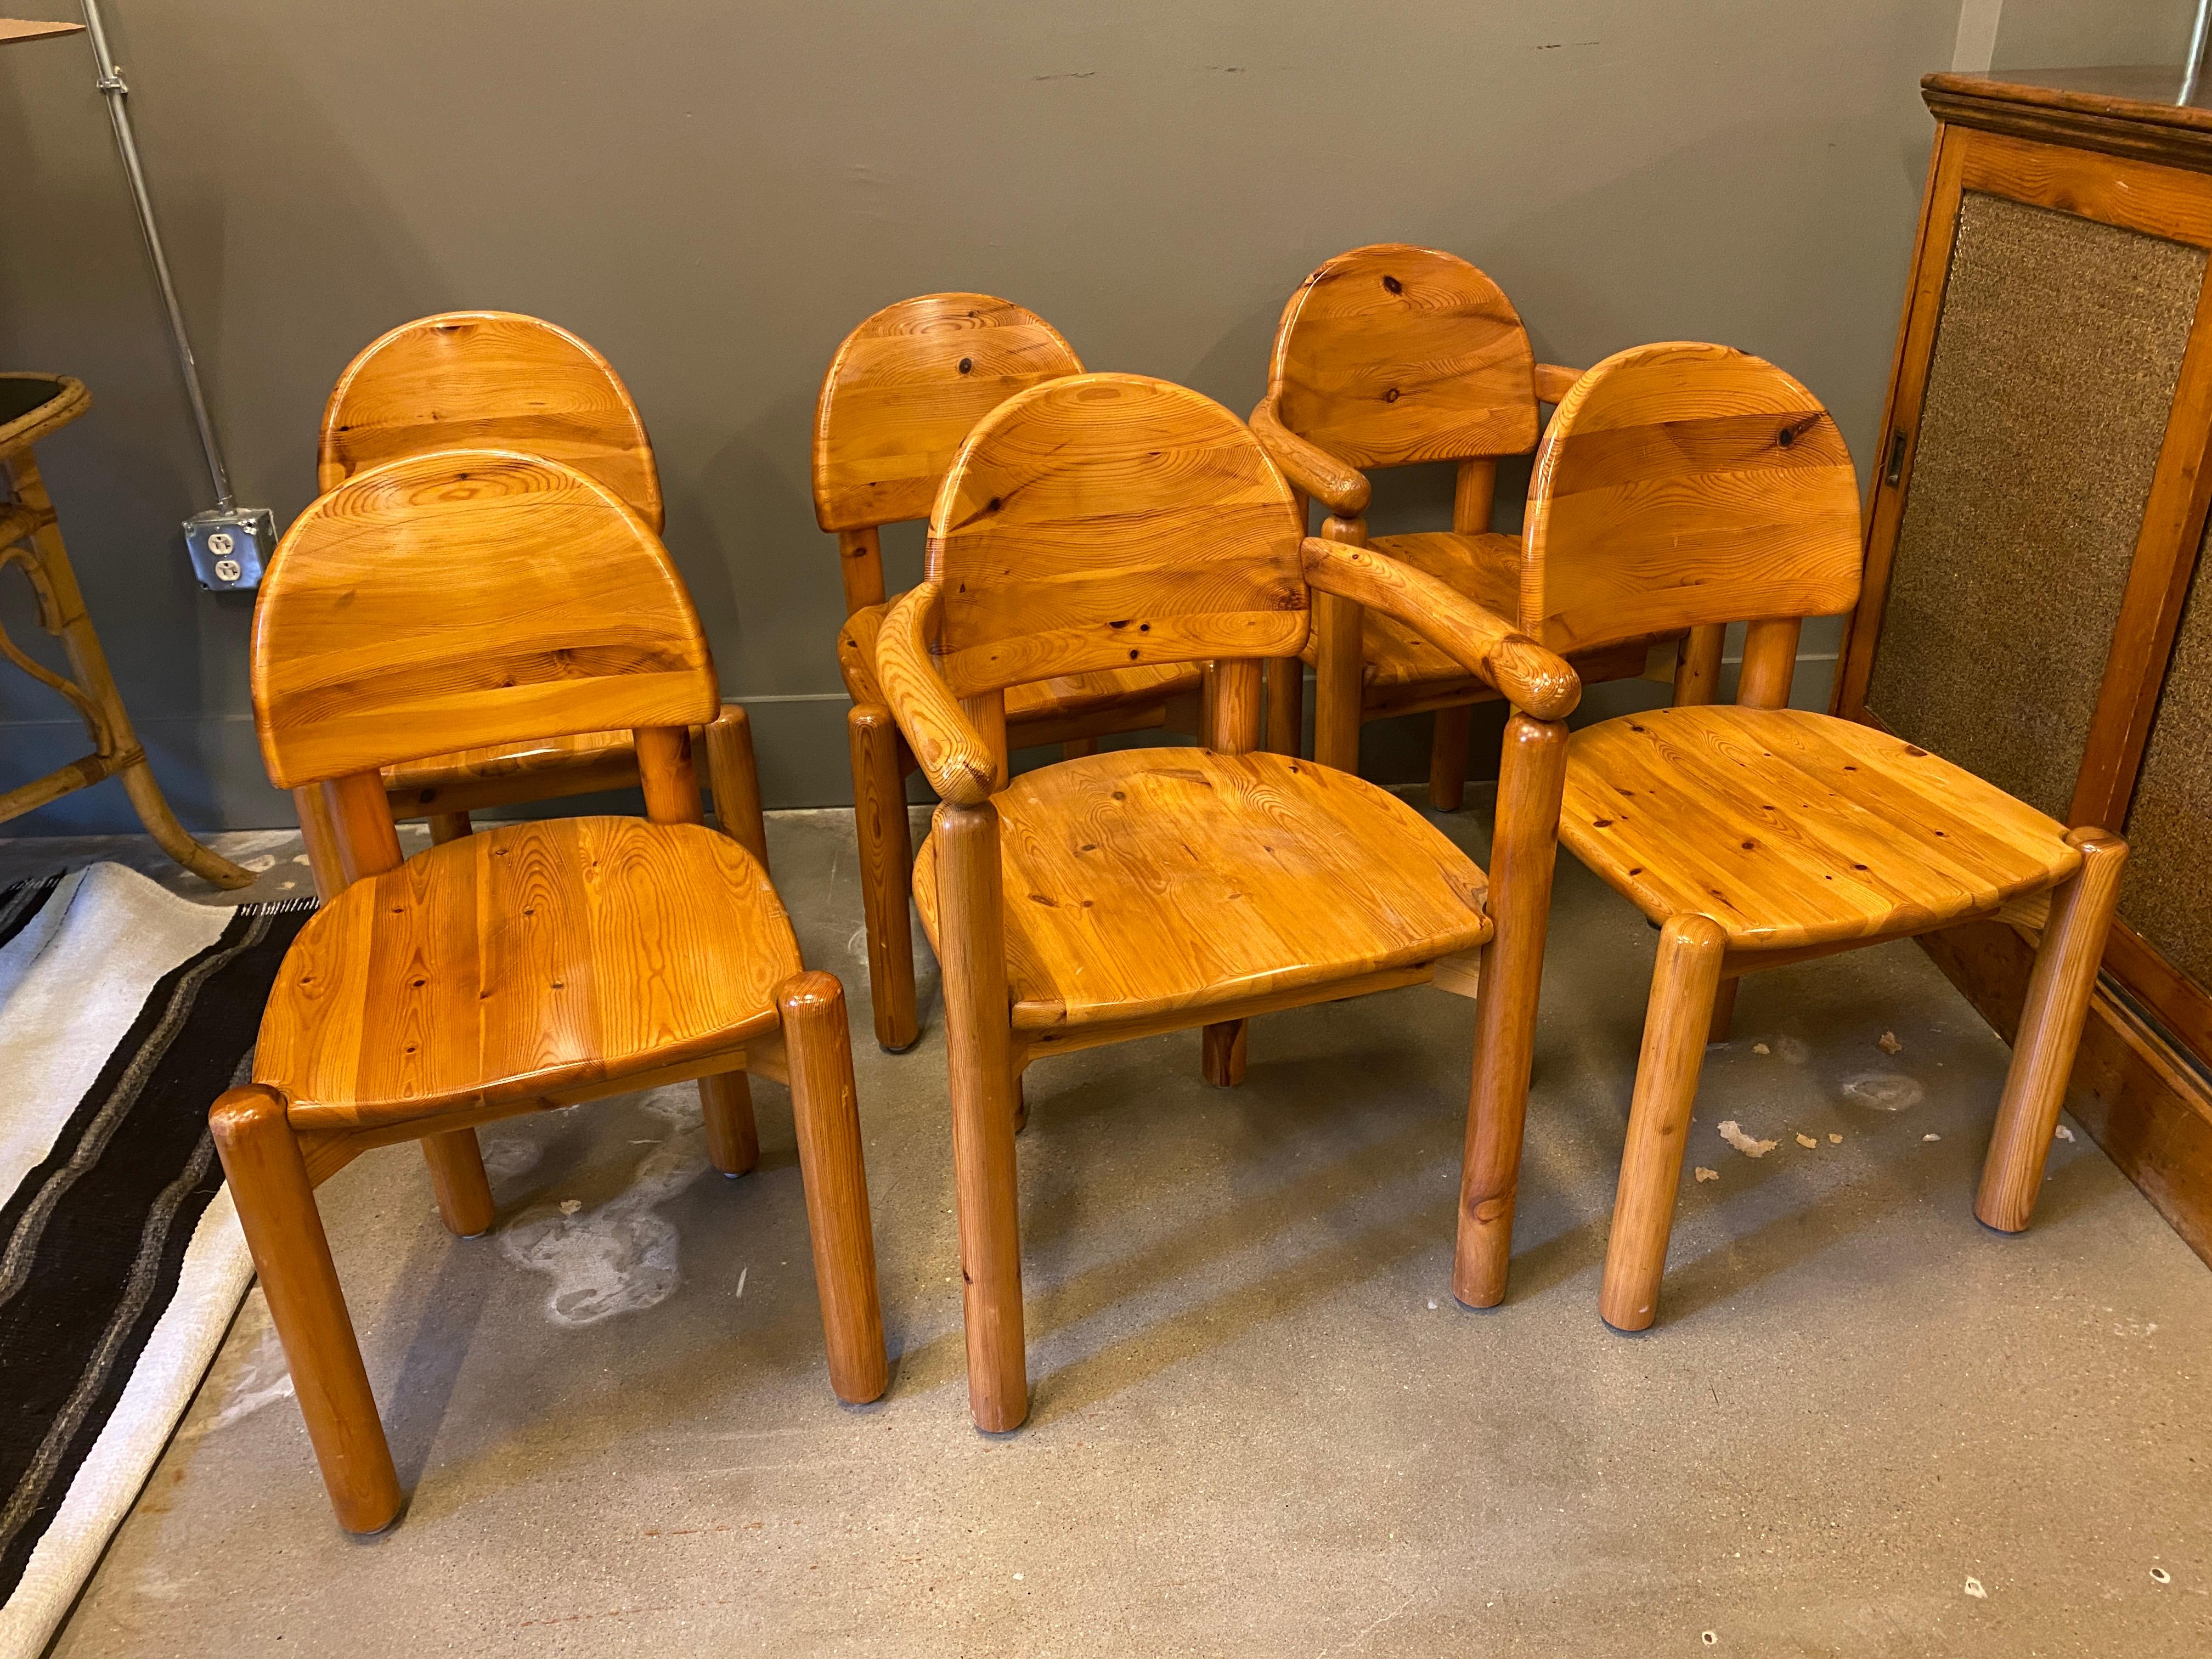 A hard to find set of Mid-Century Modern or Scandinavian Modern dining chairs designed by Rainer Daumiller, Danish architect and designer. Manufactured by Hirtshals Savværk (Hirtshals Sawmill) in Denmark of solid pine. Comfortable. Set includes 4